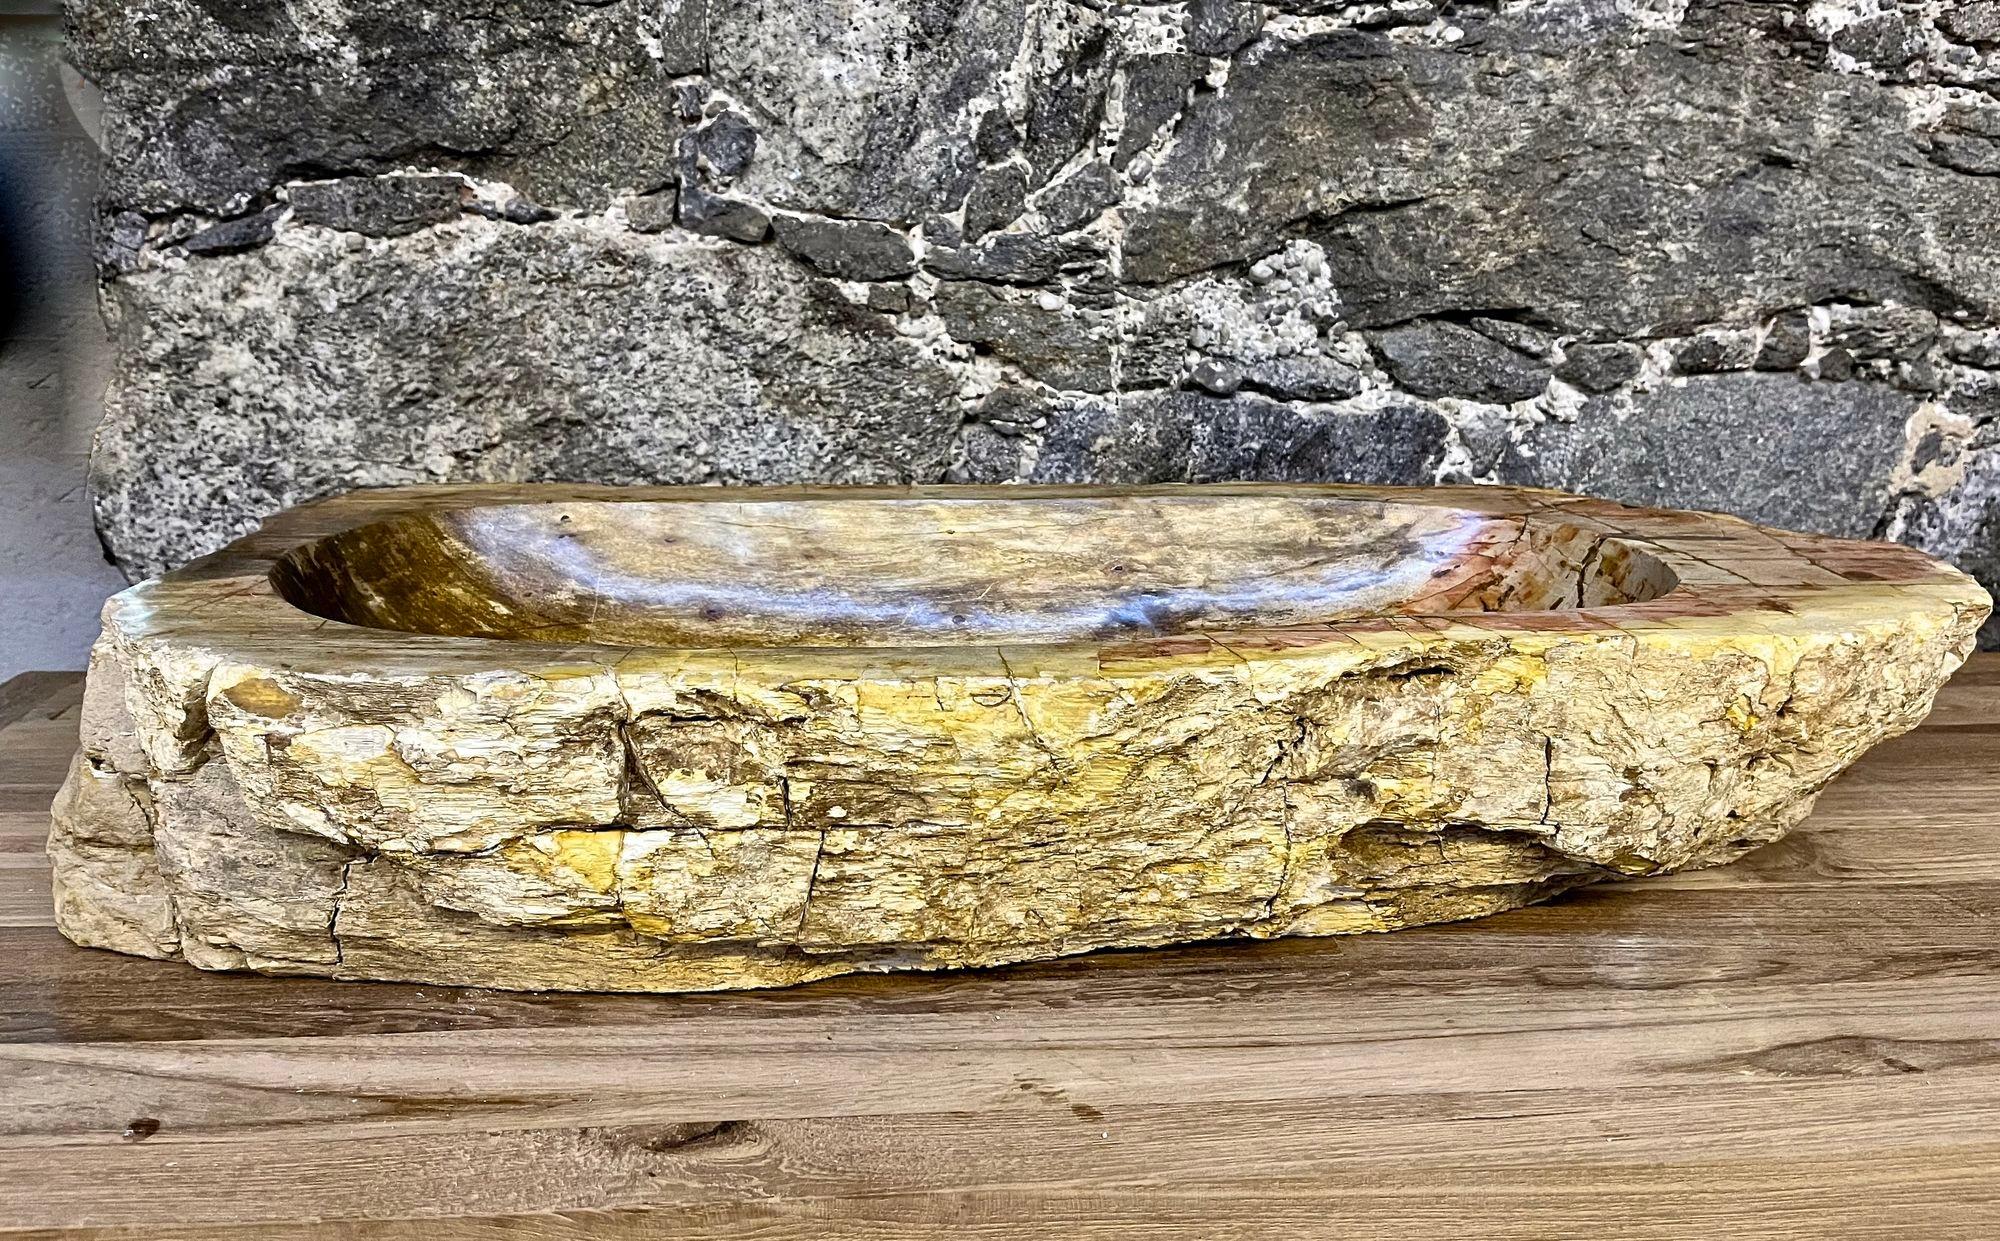 Amazing looking petrified wood sink in absolute top quality. This impressive large sink comes with a unique shape and outstanding natural coloration in beige, brown, yellow and light red tones. The inside of the sink shows a polished surface while